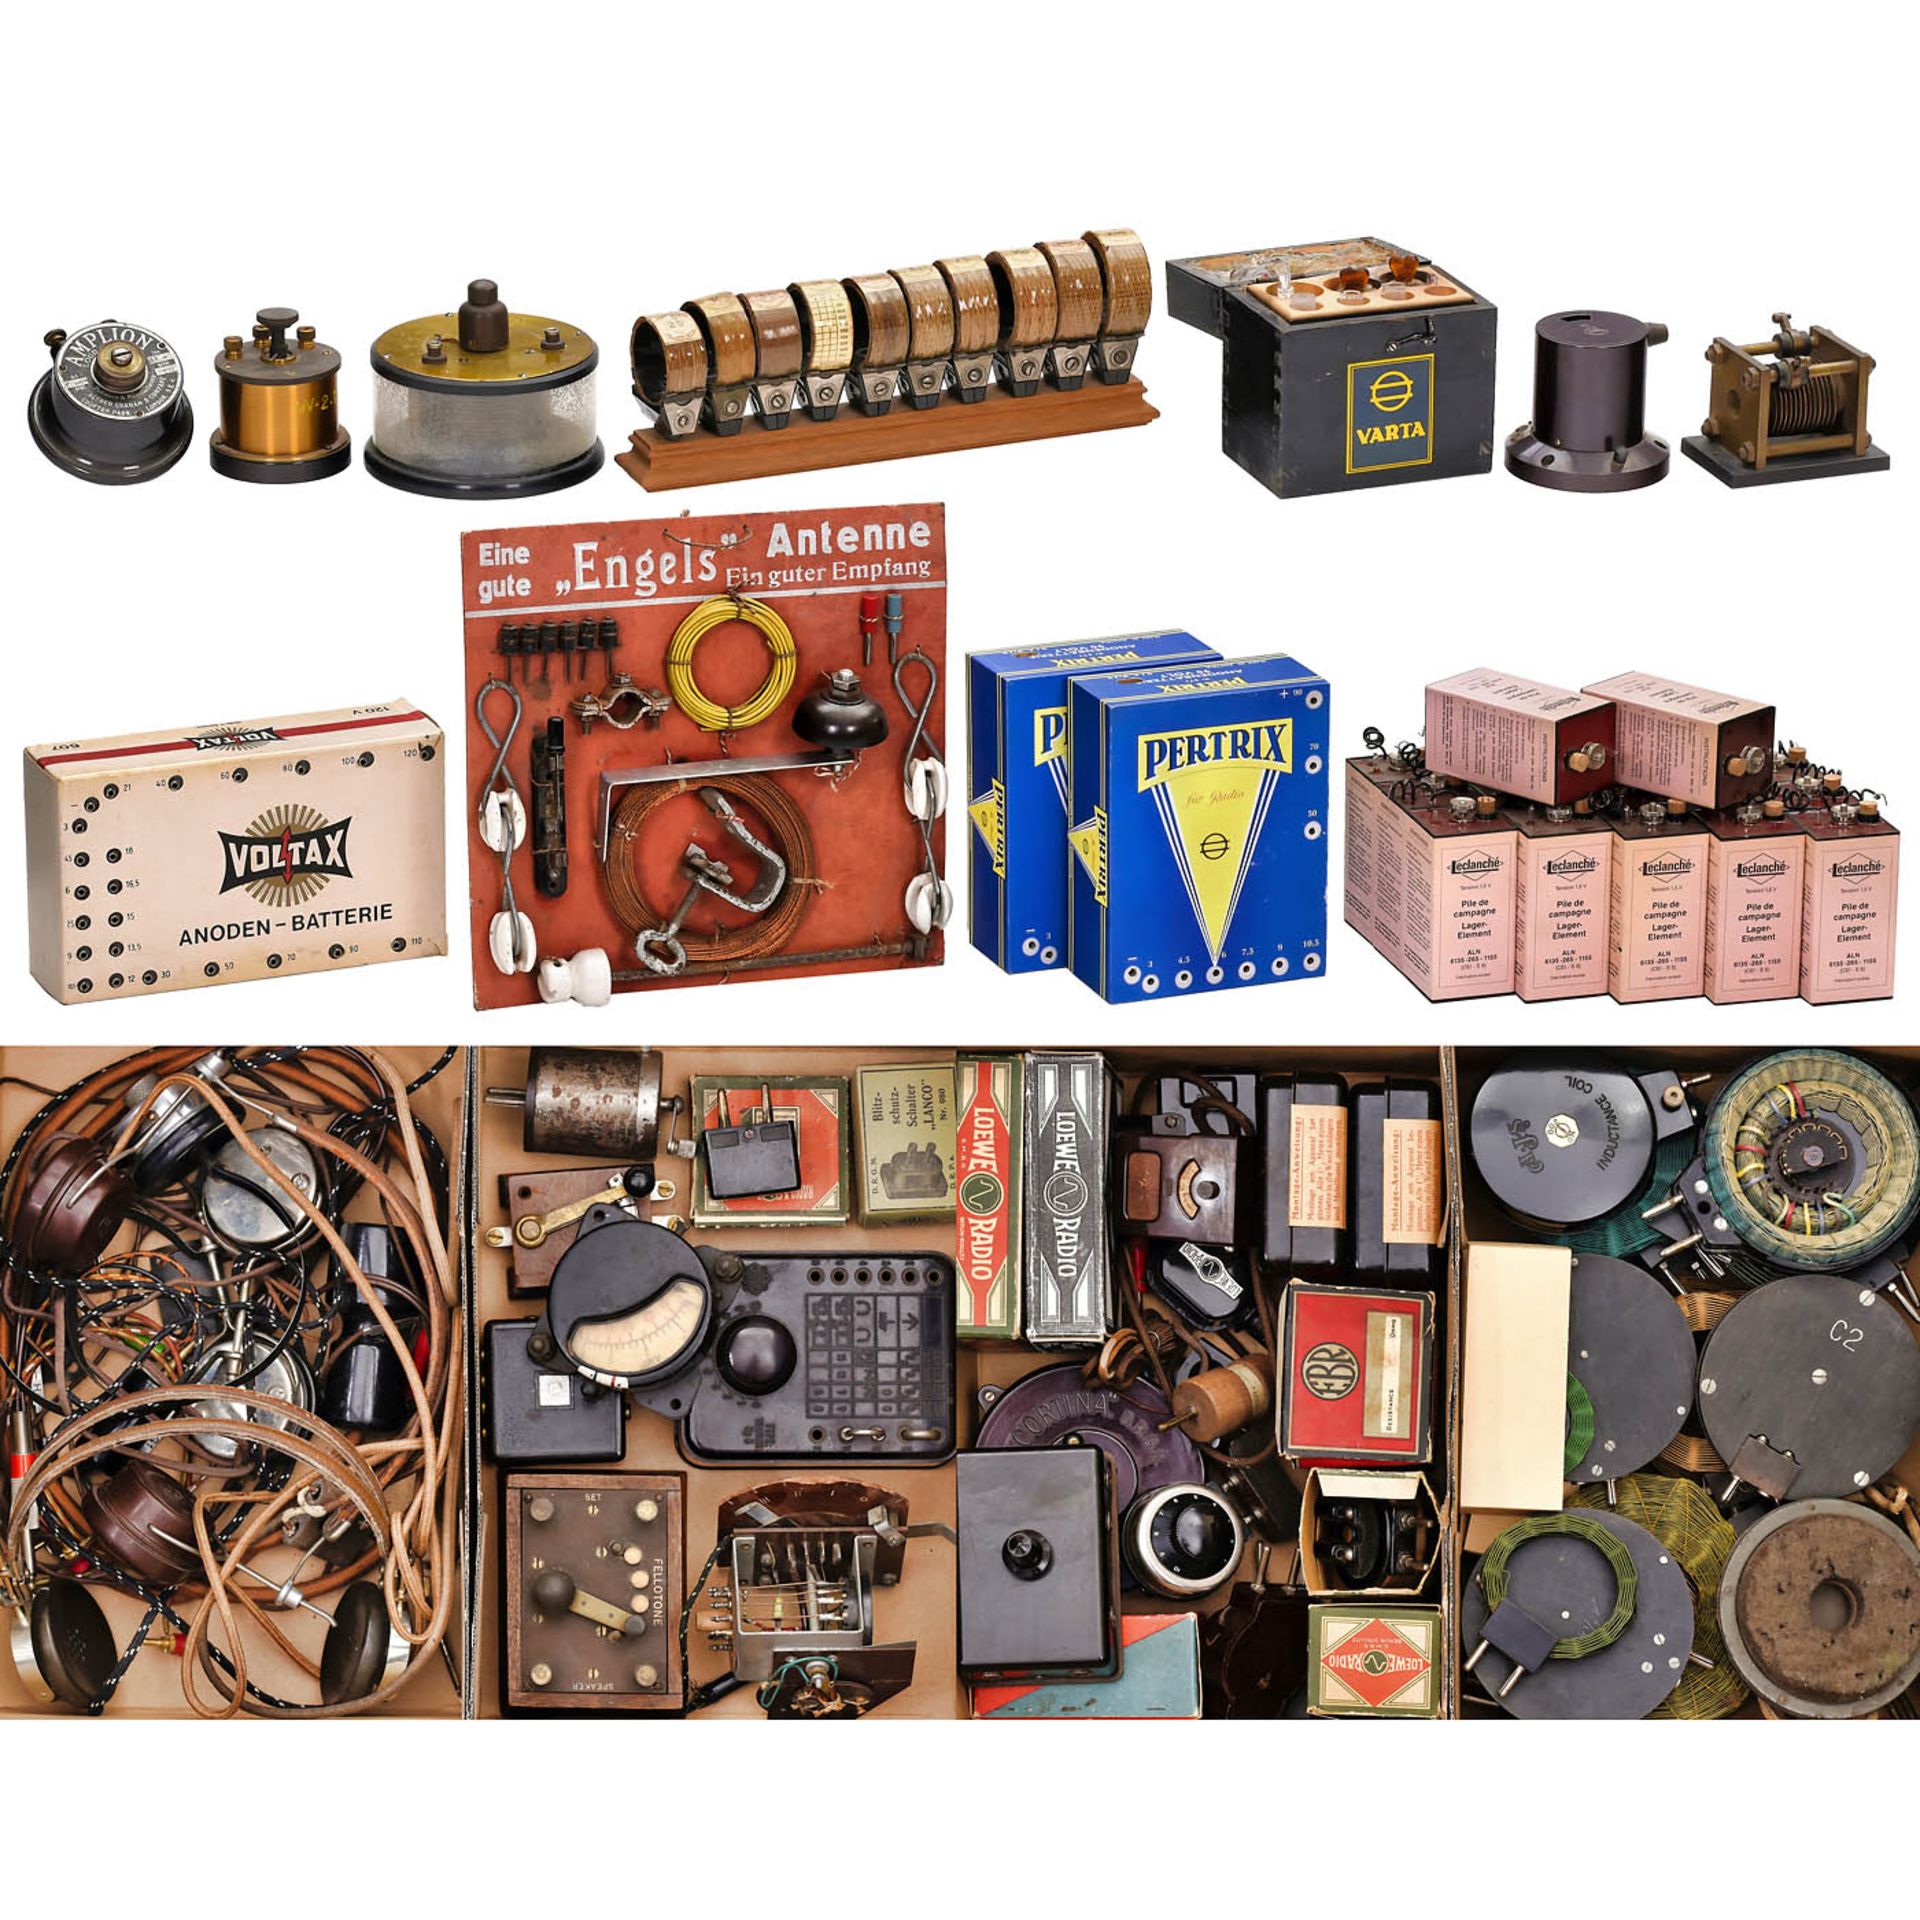 Radio Technical Components and Accessories, c. 1920/30